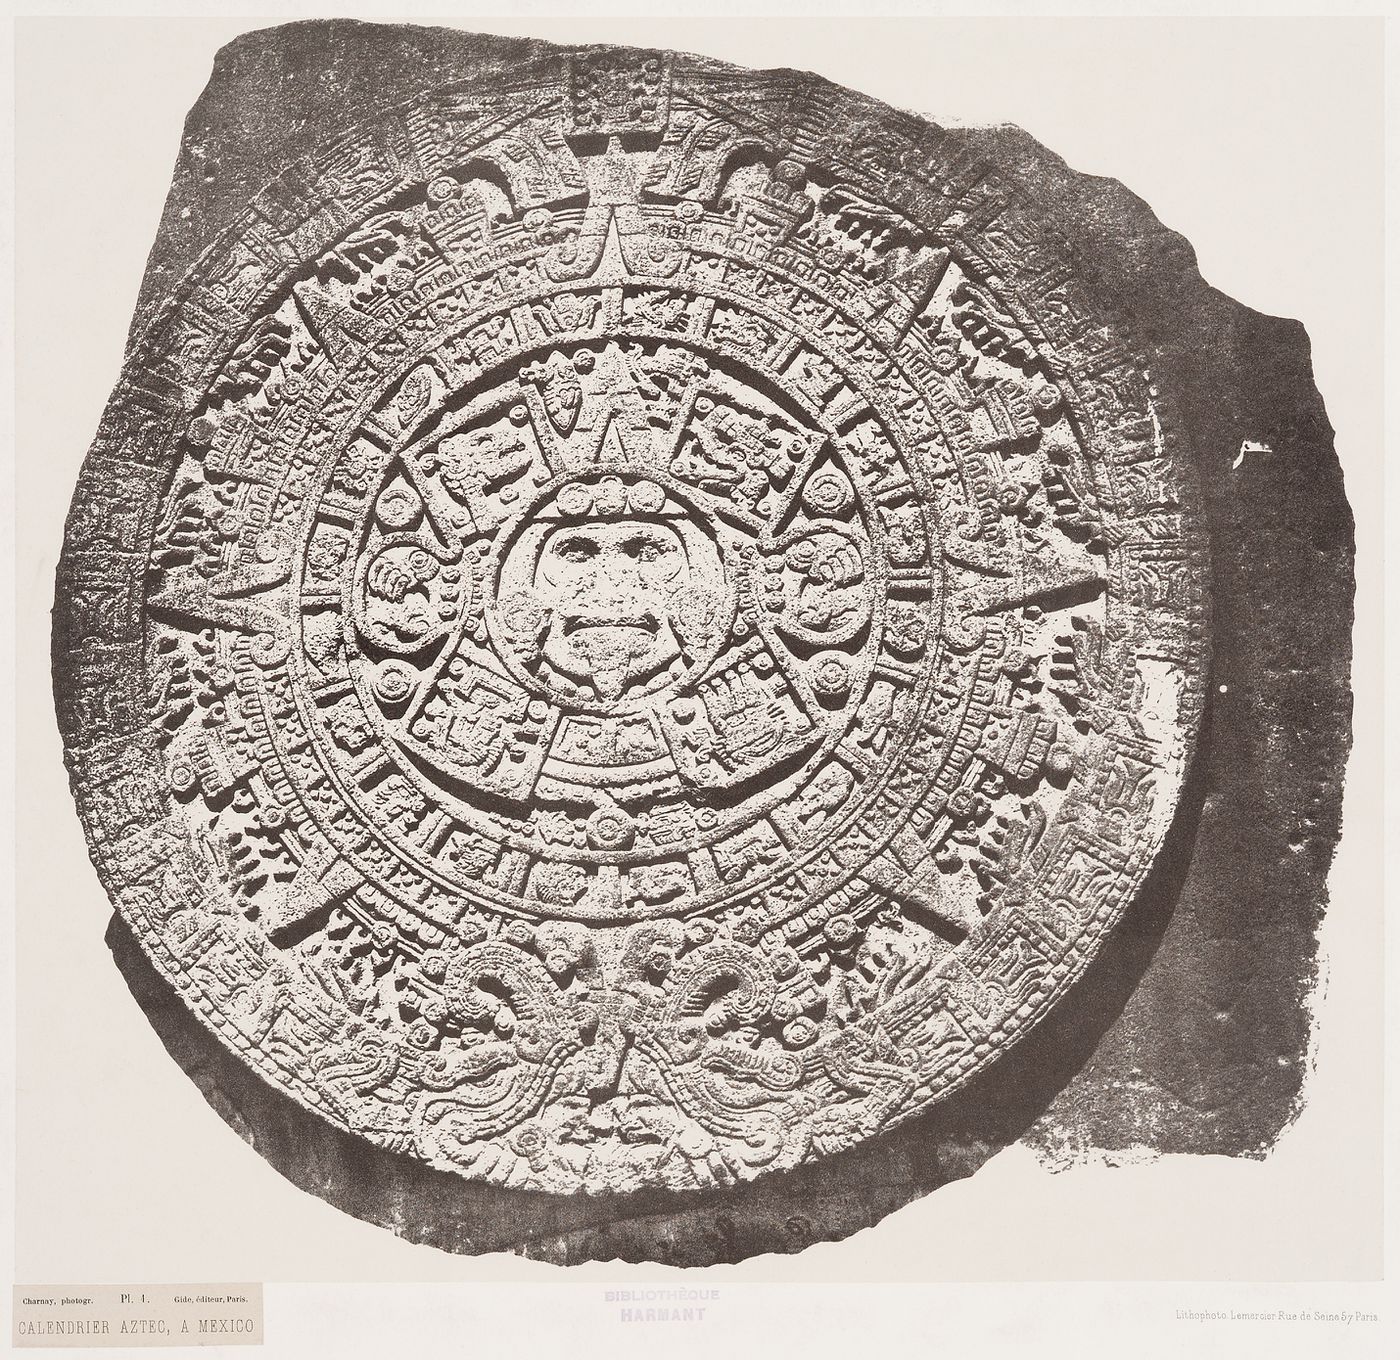 Close-up view of the Sun Stone (also known as the Aztec Calendar Stone and Cuauhxicalli [Eagle Bowl]) with reliefs, Mexico City, Mexico